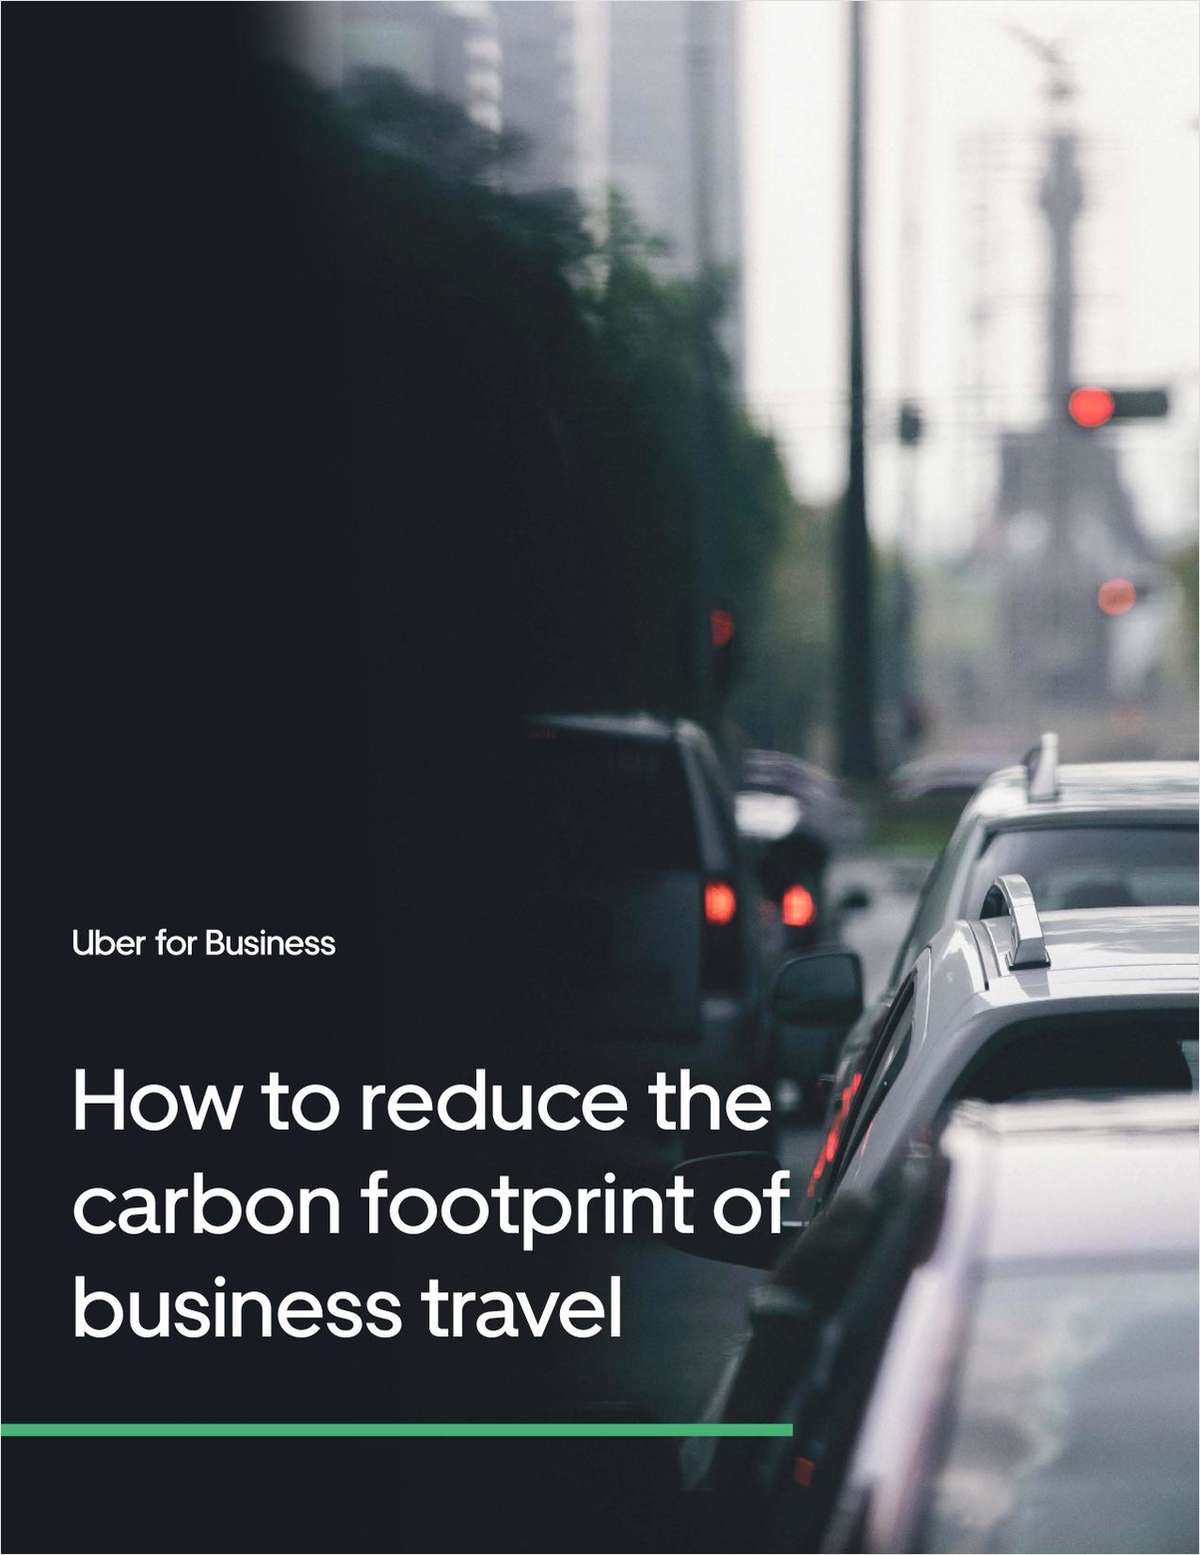 How to reduce the carbon footprint of business travel